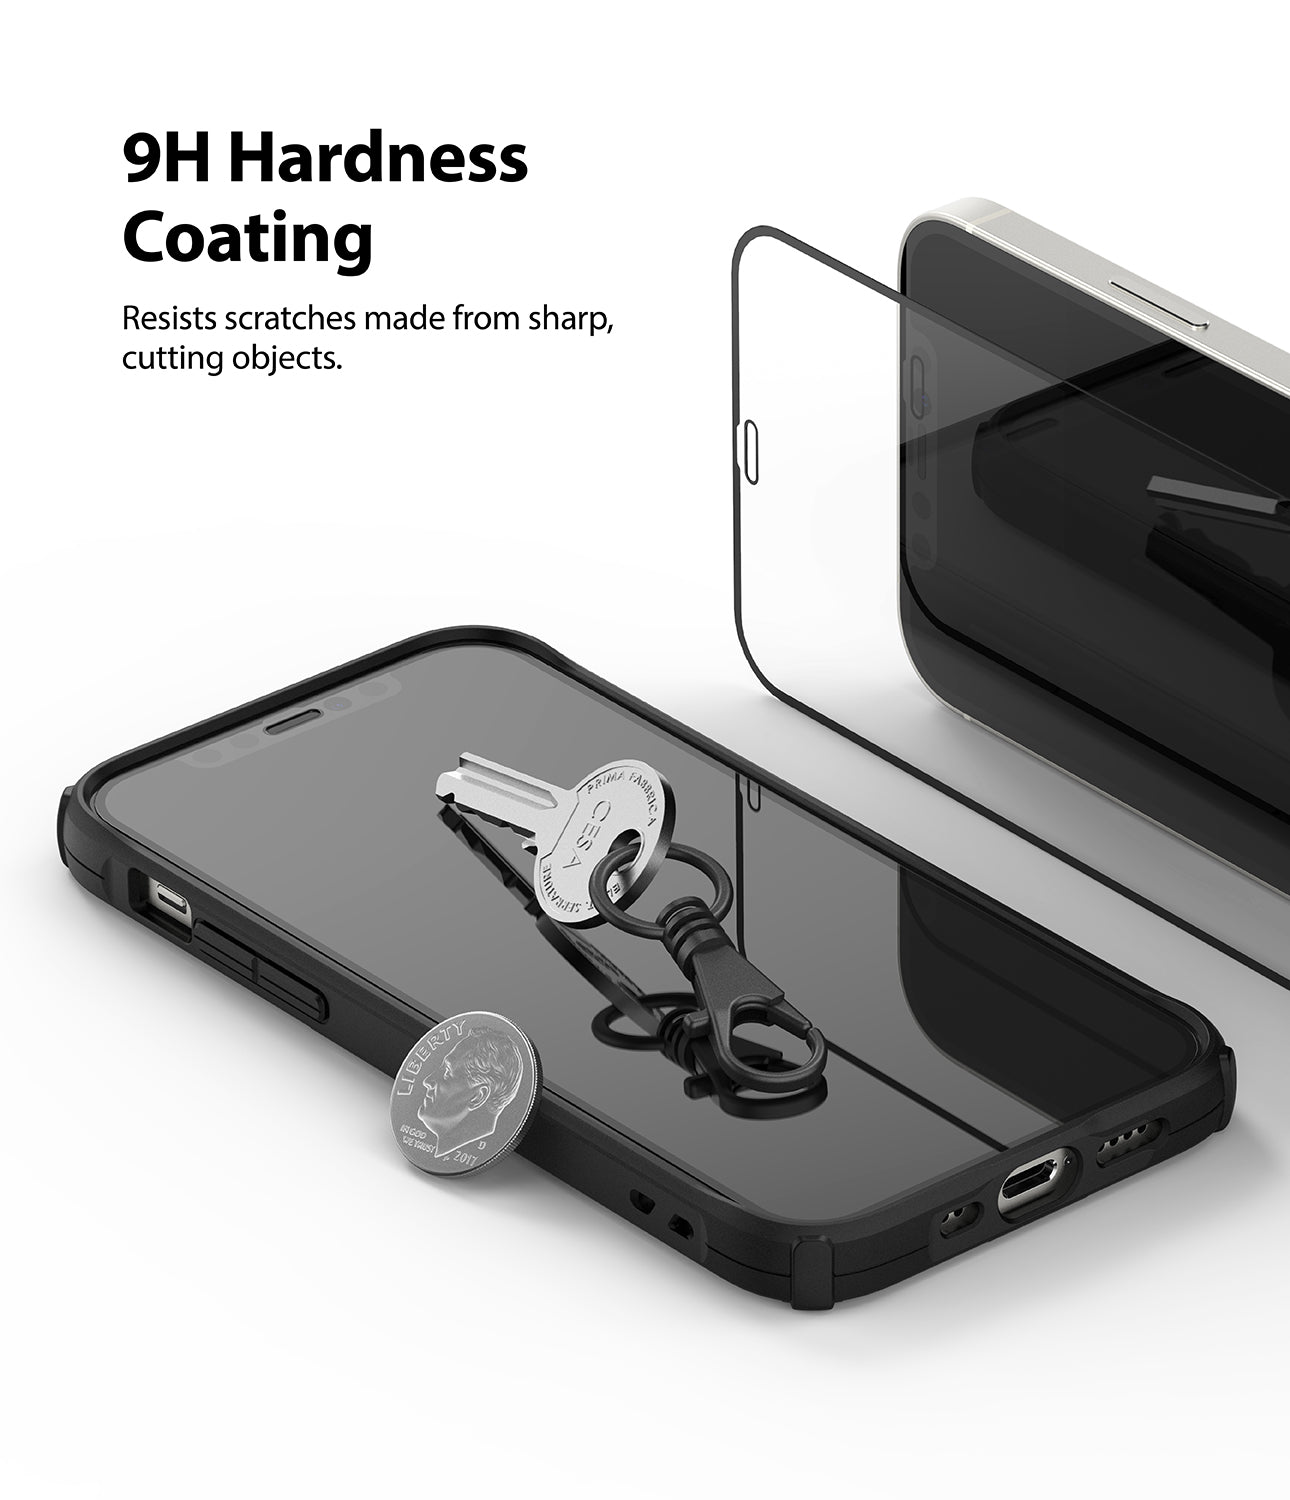 iPhone 12 Mini Screen Protector | Invisible Defender Glass - 9H Hardness Coating